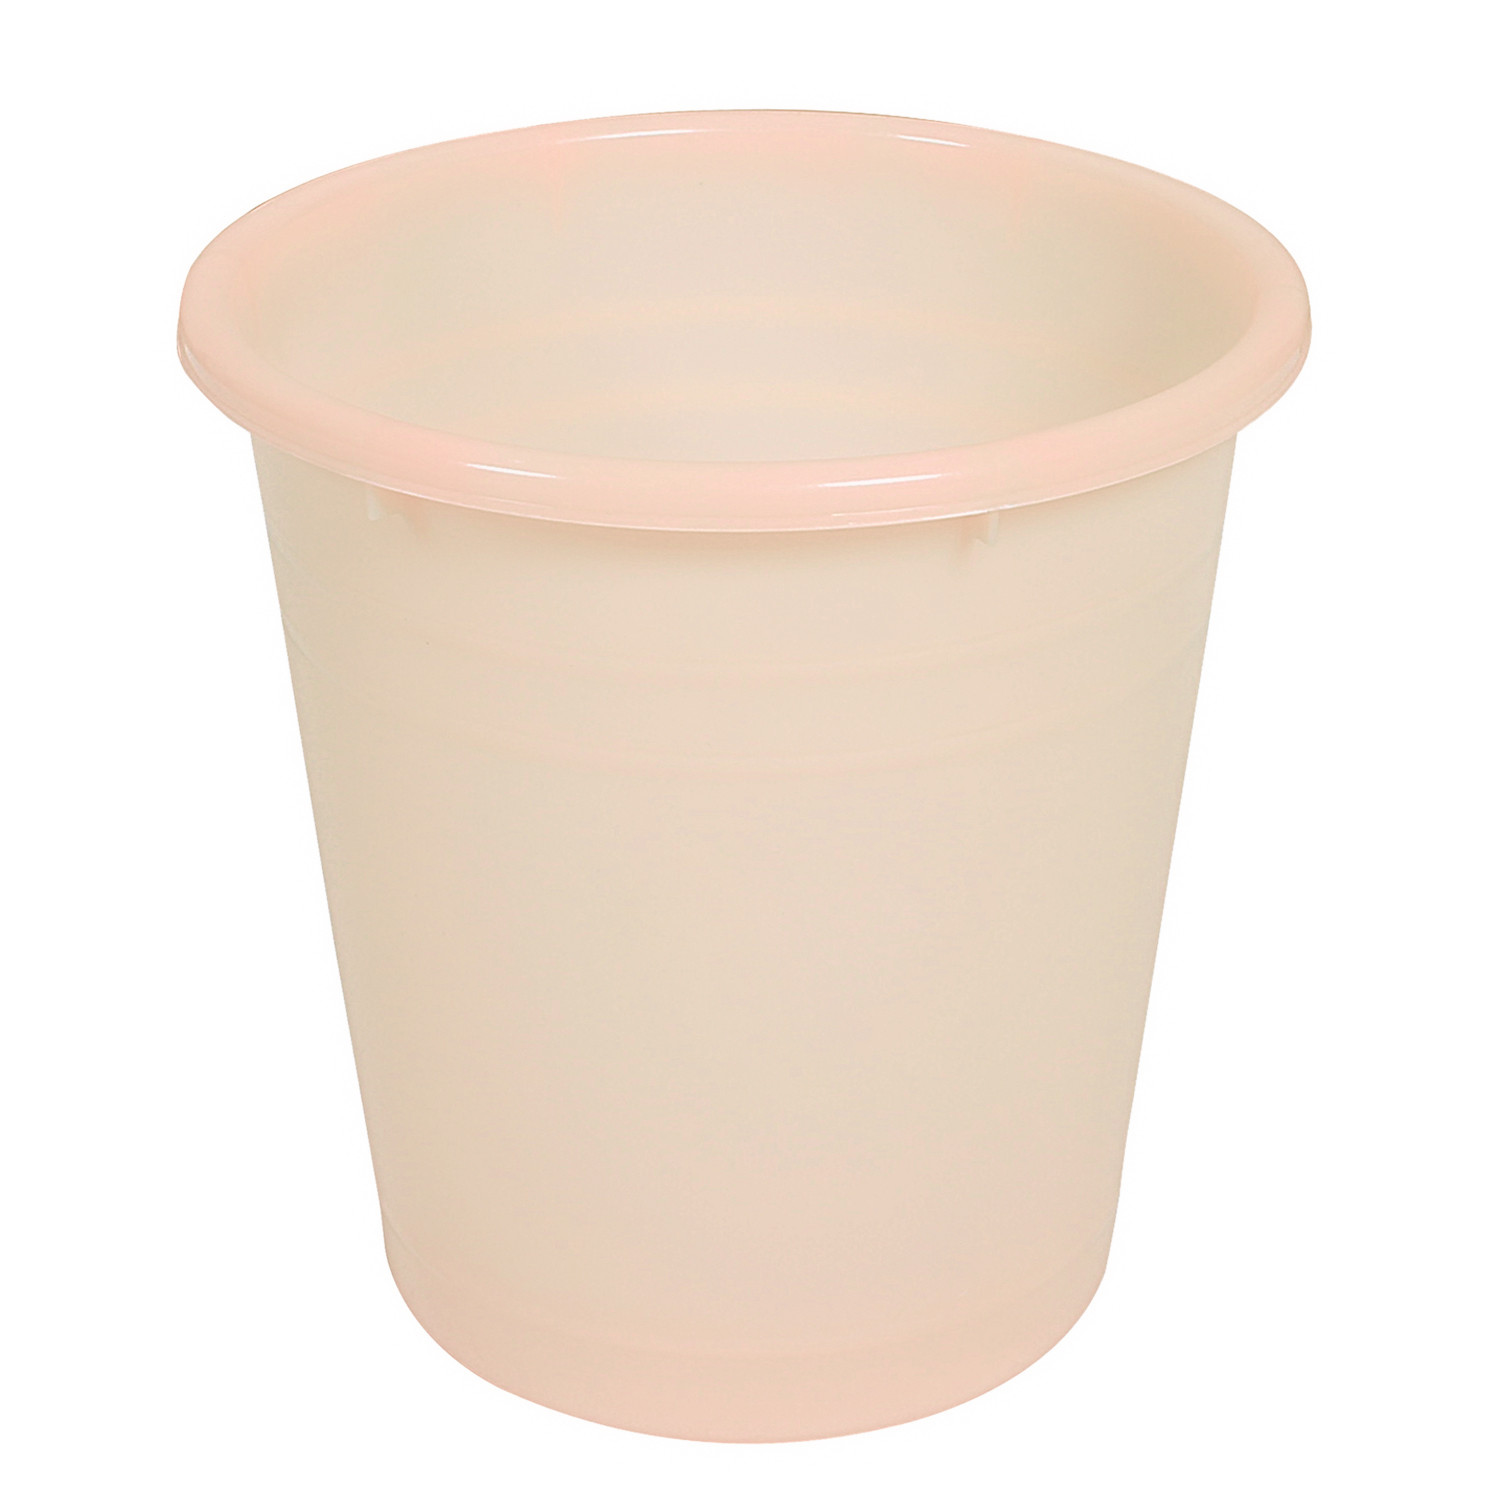 Kuber Industries Plastic Dustbin|Portable Garbage Basket & Round Trash Can for Home,Kitchen,Office,College,7 Ltr.(Cream)